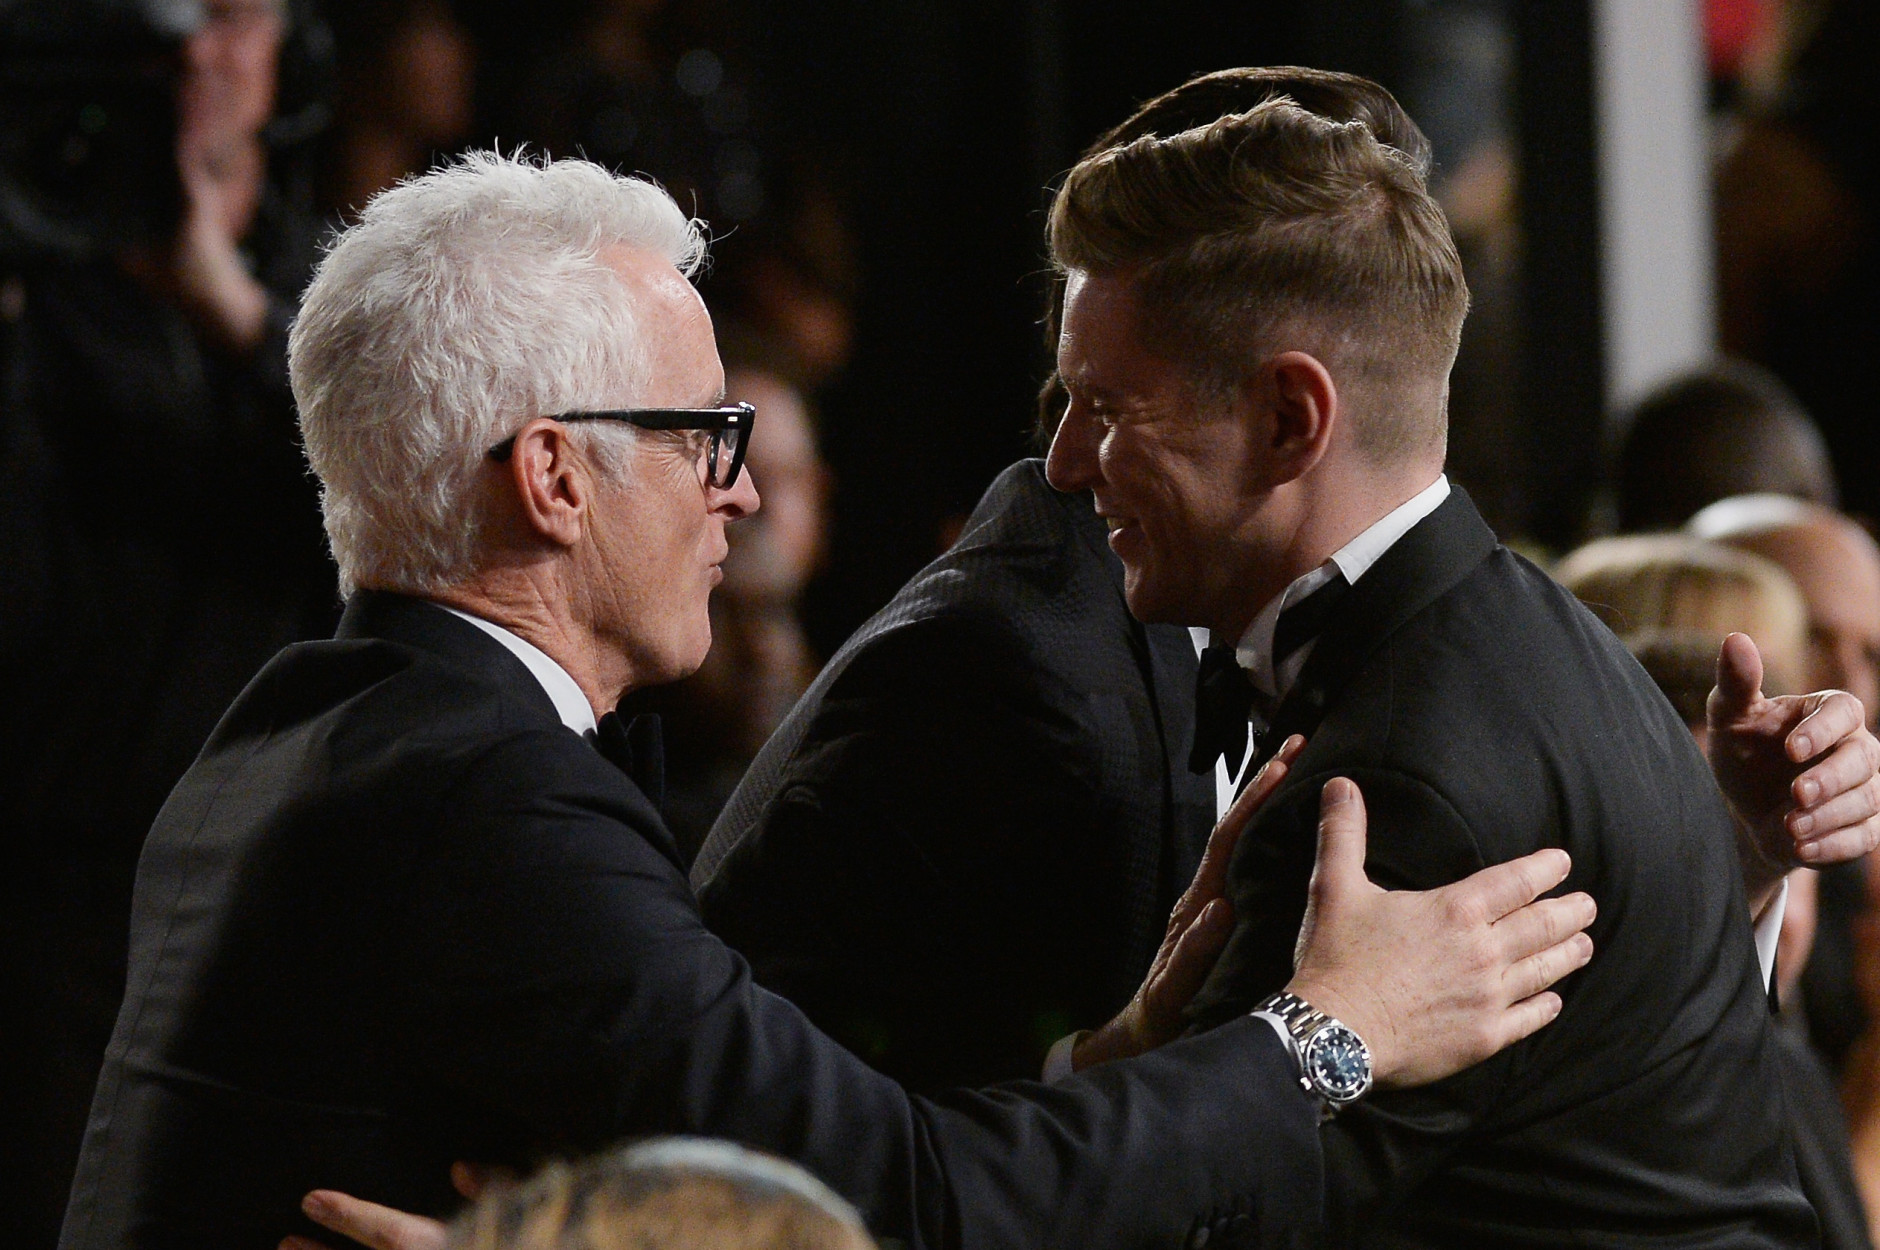 LOS ANGELES, CA - JANUARY 30:  Actors John Slattery (L) and Allen Leech onstage during the 22nd Annual Screen Actors Guild Awards at The Shrine Auditorium on January 30, 2016 in Los Angeles, California.  (Photo by Kevork Djansezian/Getty Images)